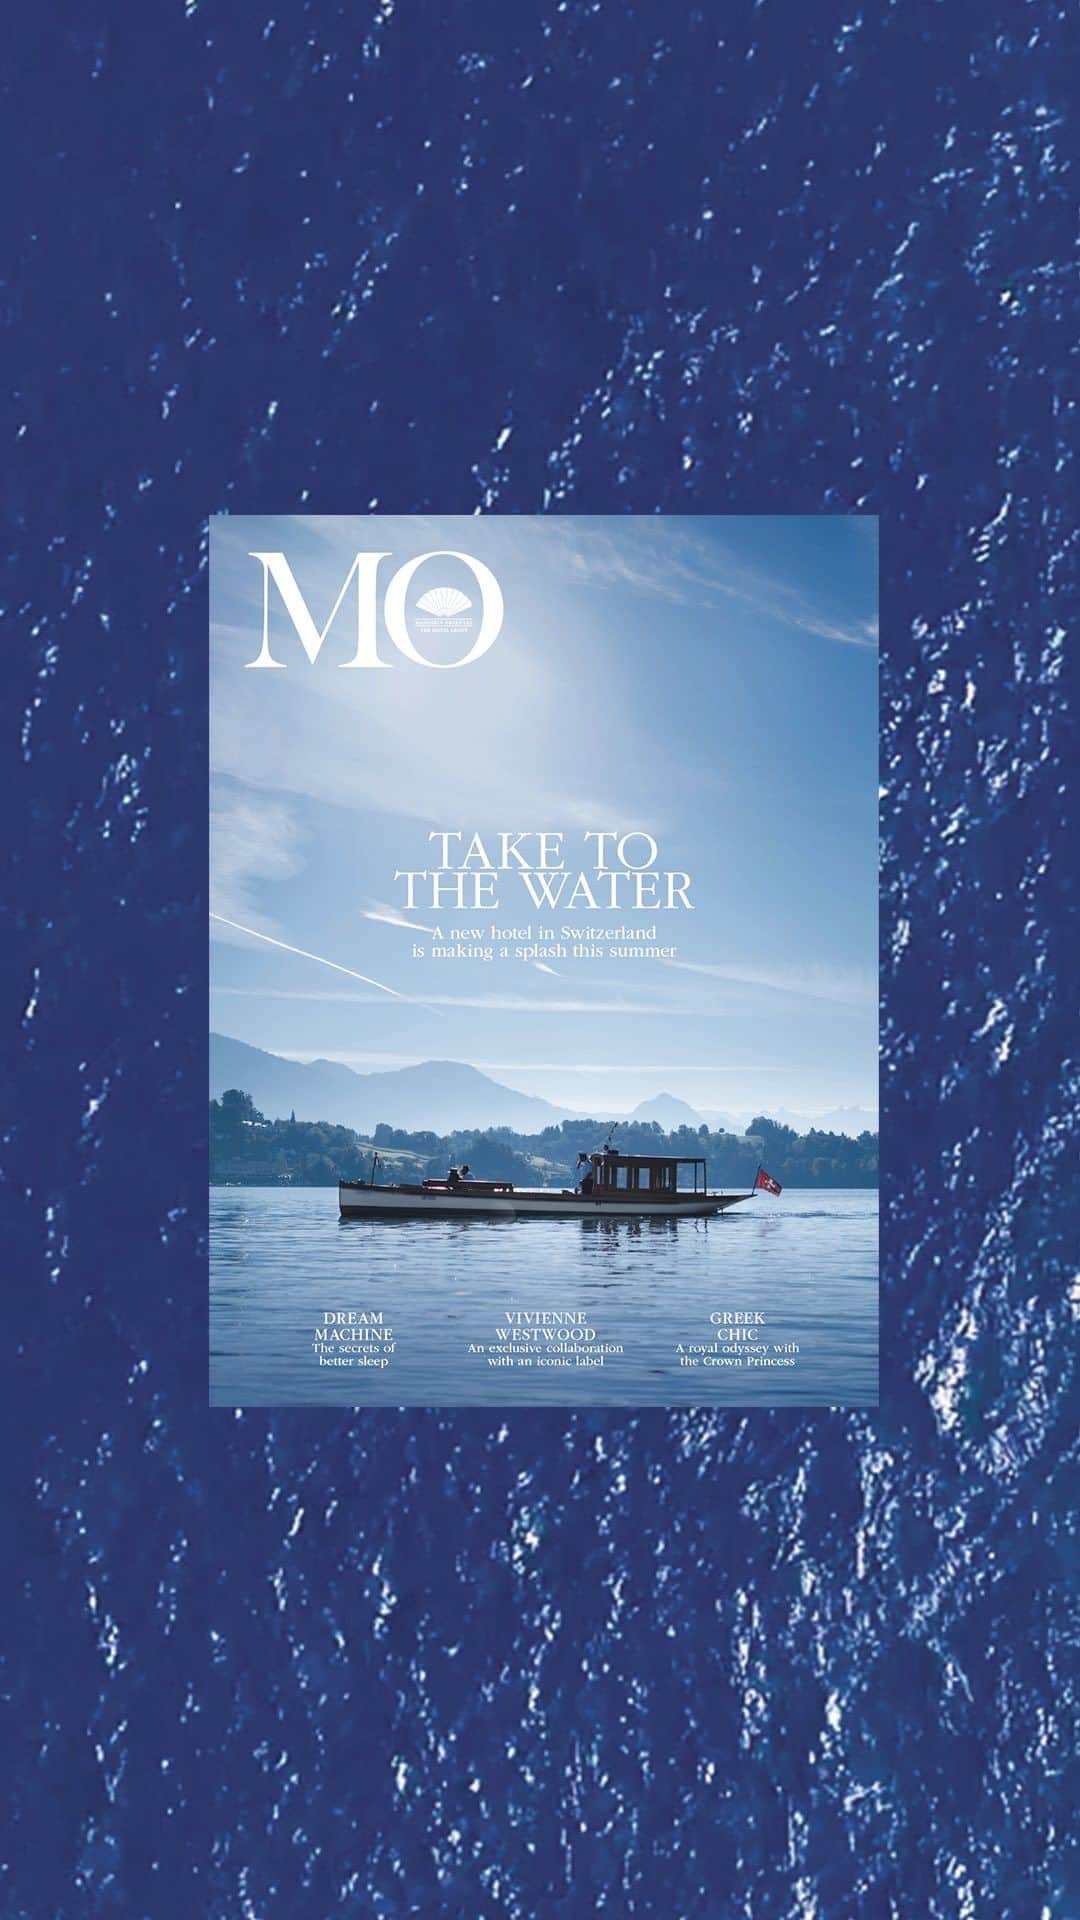 Mandarin Oriental, Tokyoのインスタグラム：「We’re thrilled to unveil the 2023 edition of MO Magazine, featuring the latest news and curated experiences from our hotels and tastemakers around the world. Now available for guests to read in all Mandarin Oriental hotels and resorts  MOマガジンの2023年版がリリースされましたことをお知らせいたします。 世界中のマンダリン オリエンタル ホテルやリゾートからの最新ニュースや、厳選された体験が掲載されています。 現在、すべてのマンダリン オリエンタル ホテルおよびリゾートで、お読みいただくことができます。  #ImAFan #mandarinoriental #travelmagazine」